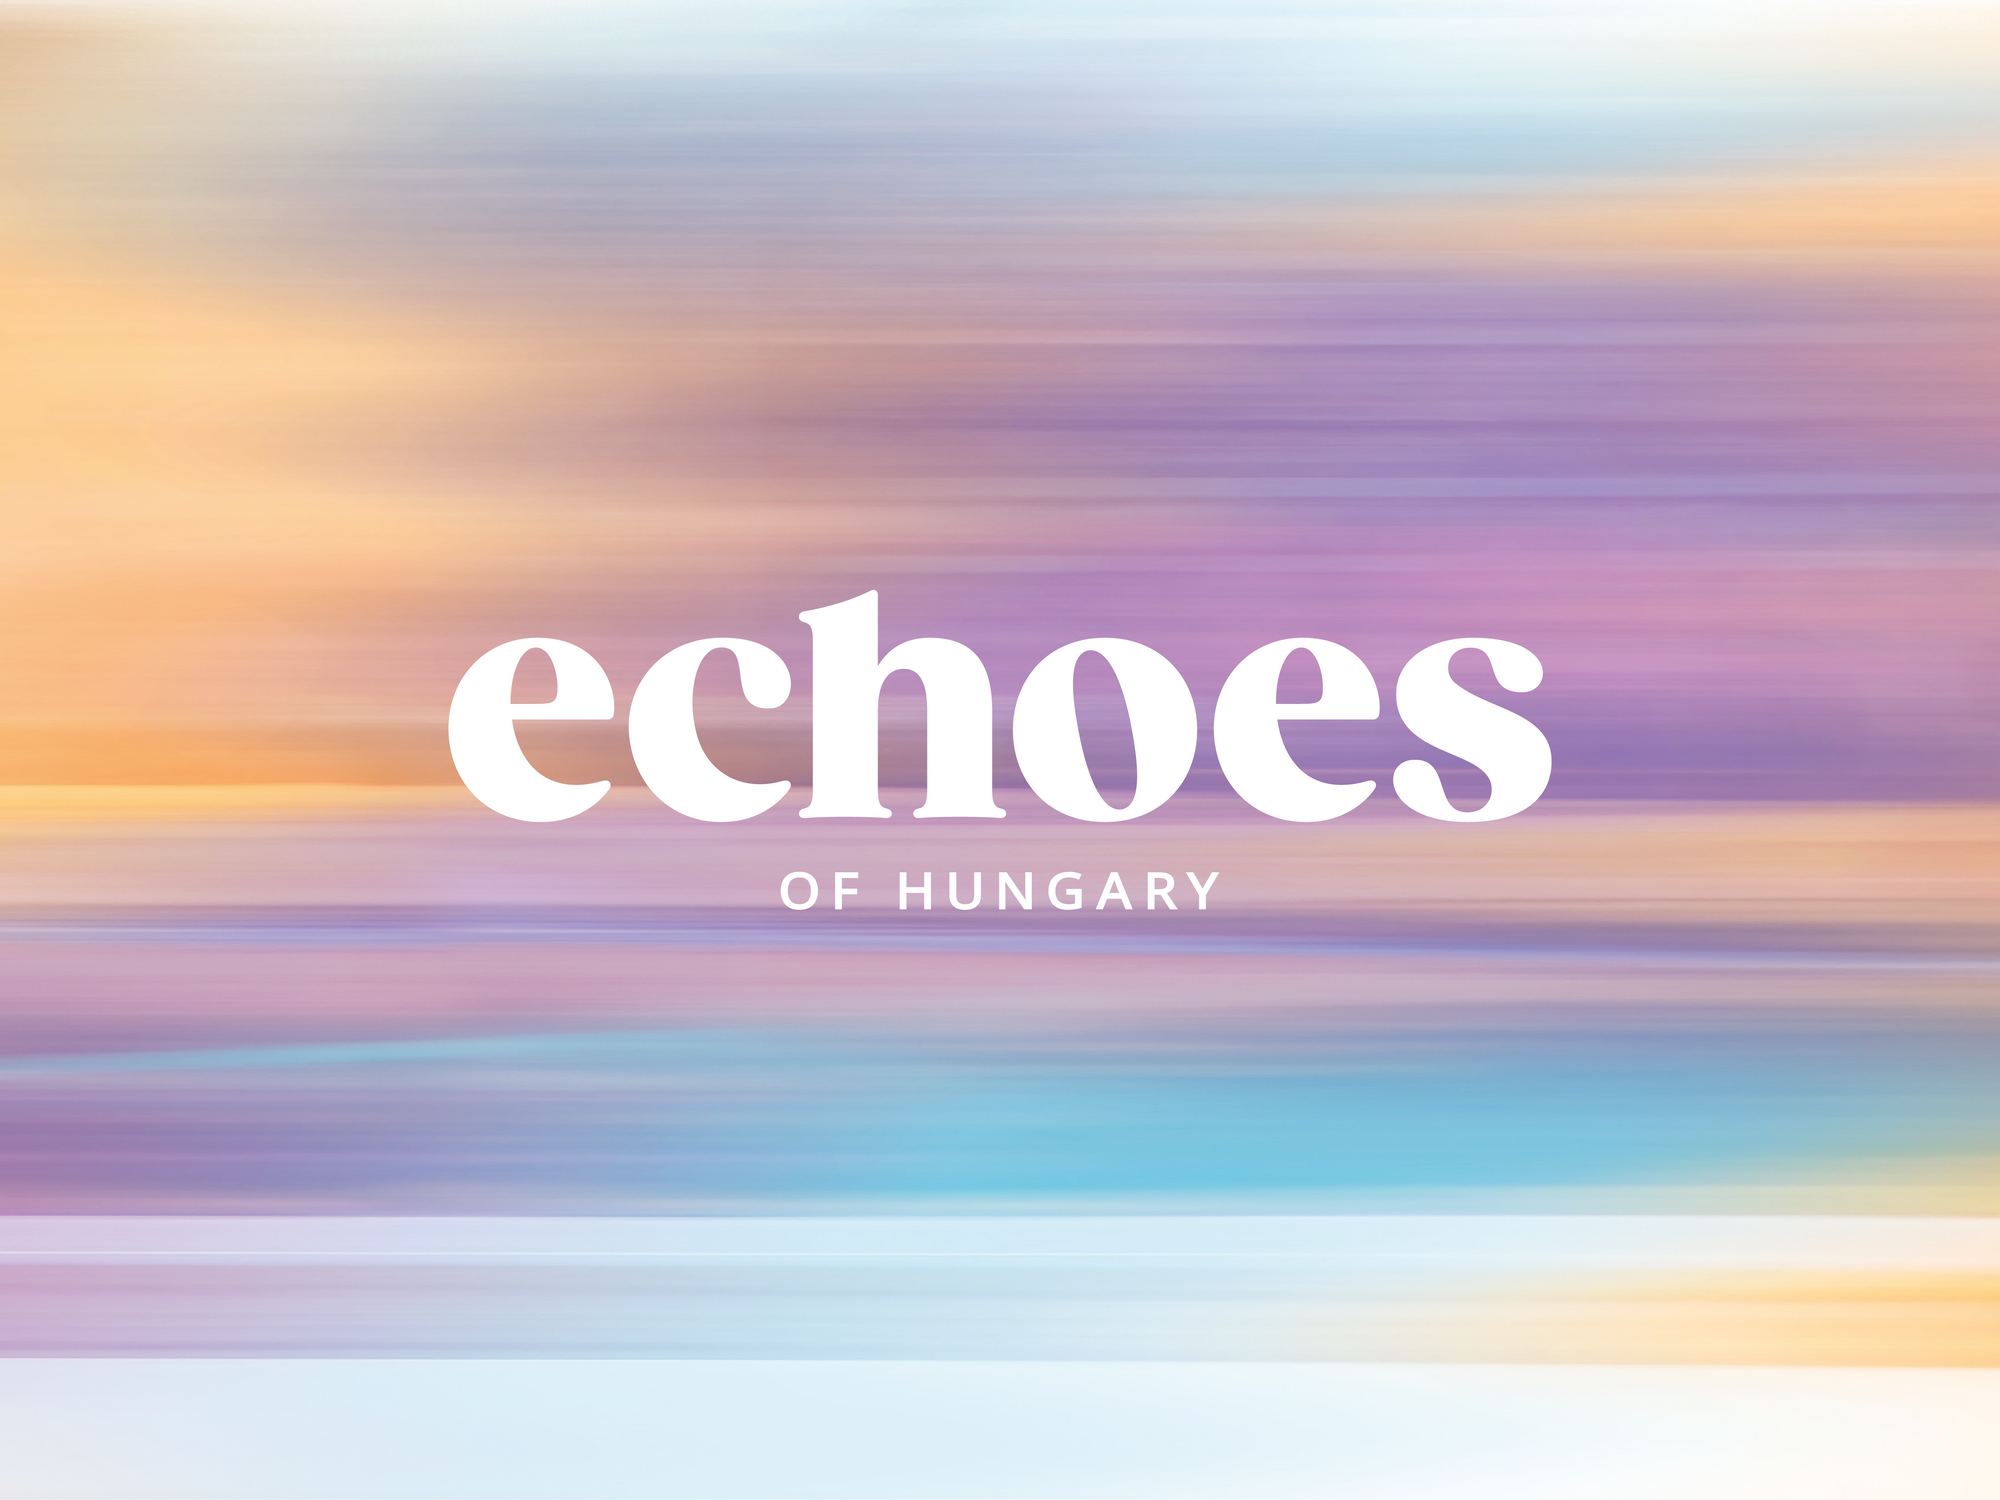 Welcome the Echoes of Hungary